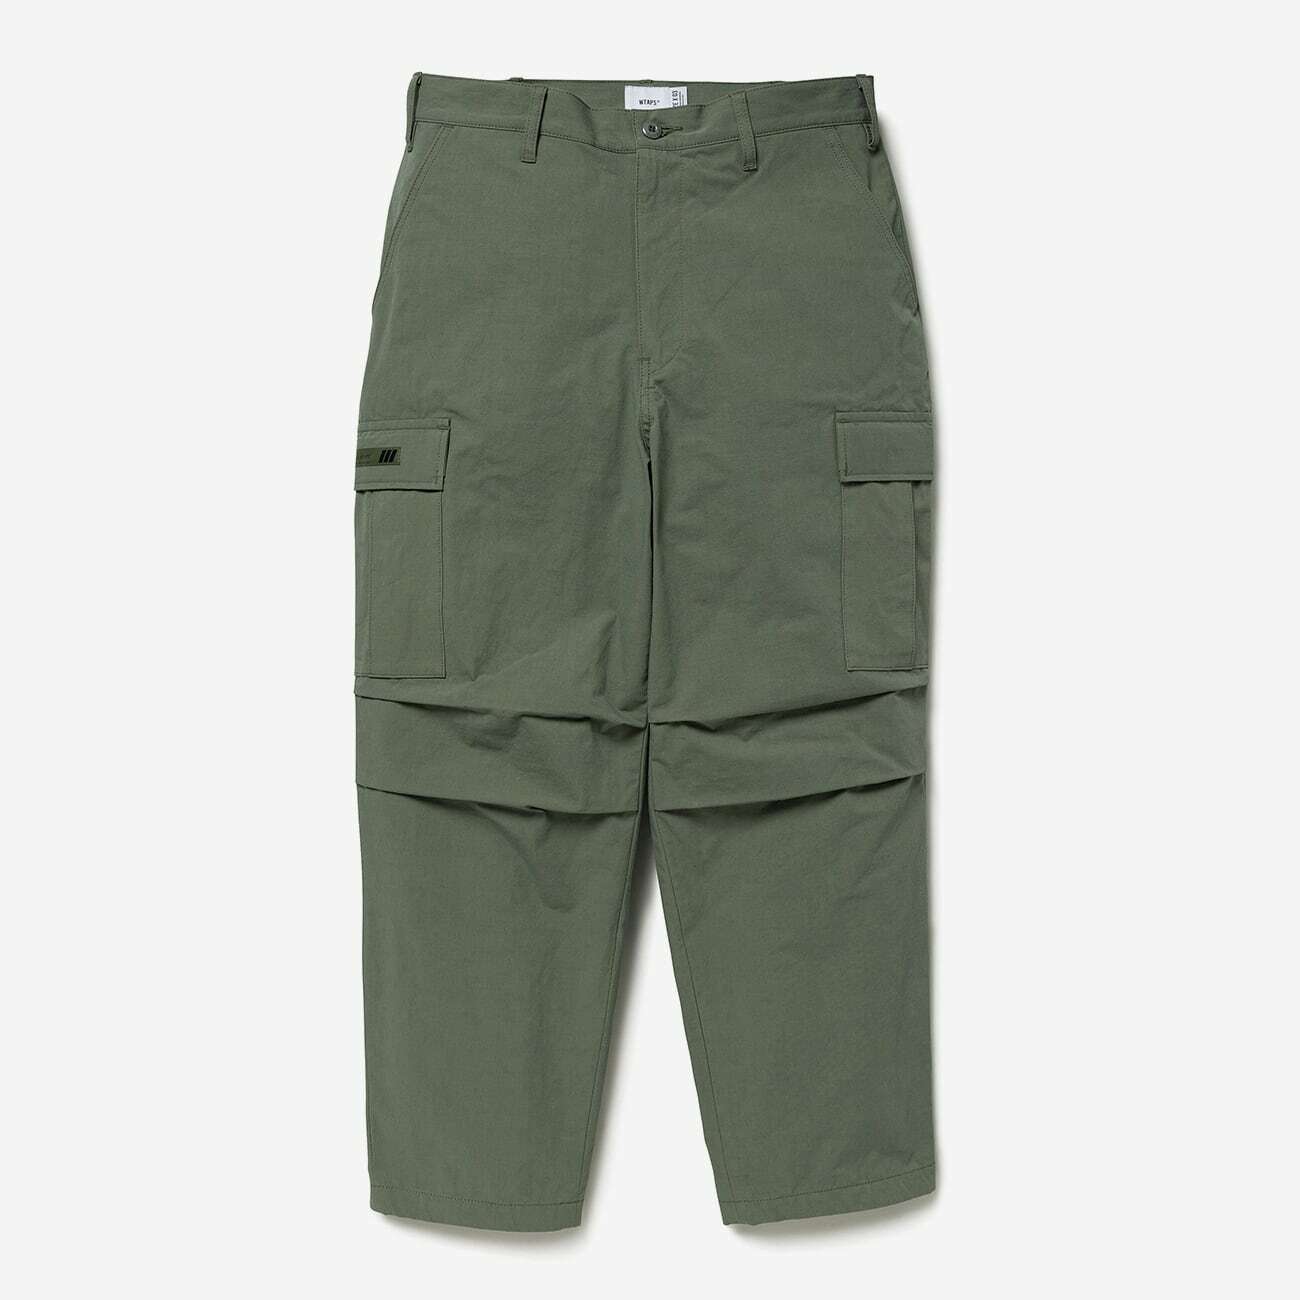 WTAPS SS23 MILT9601 / TROUSERS / NYCO. RIPSTOP OLIVE